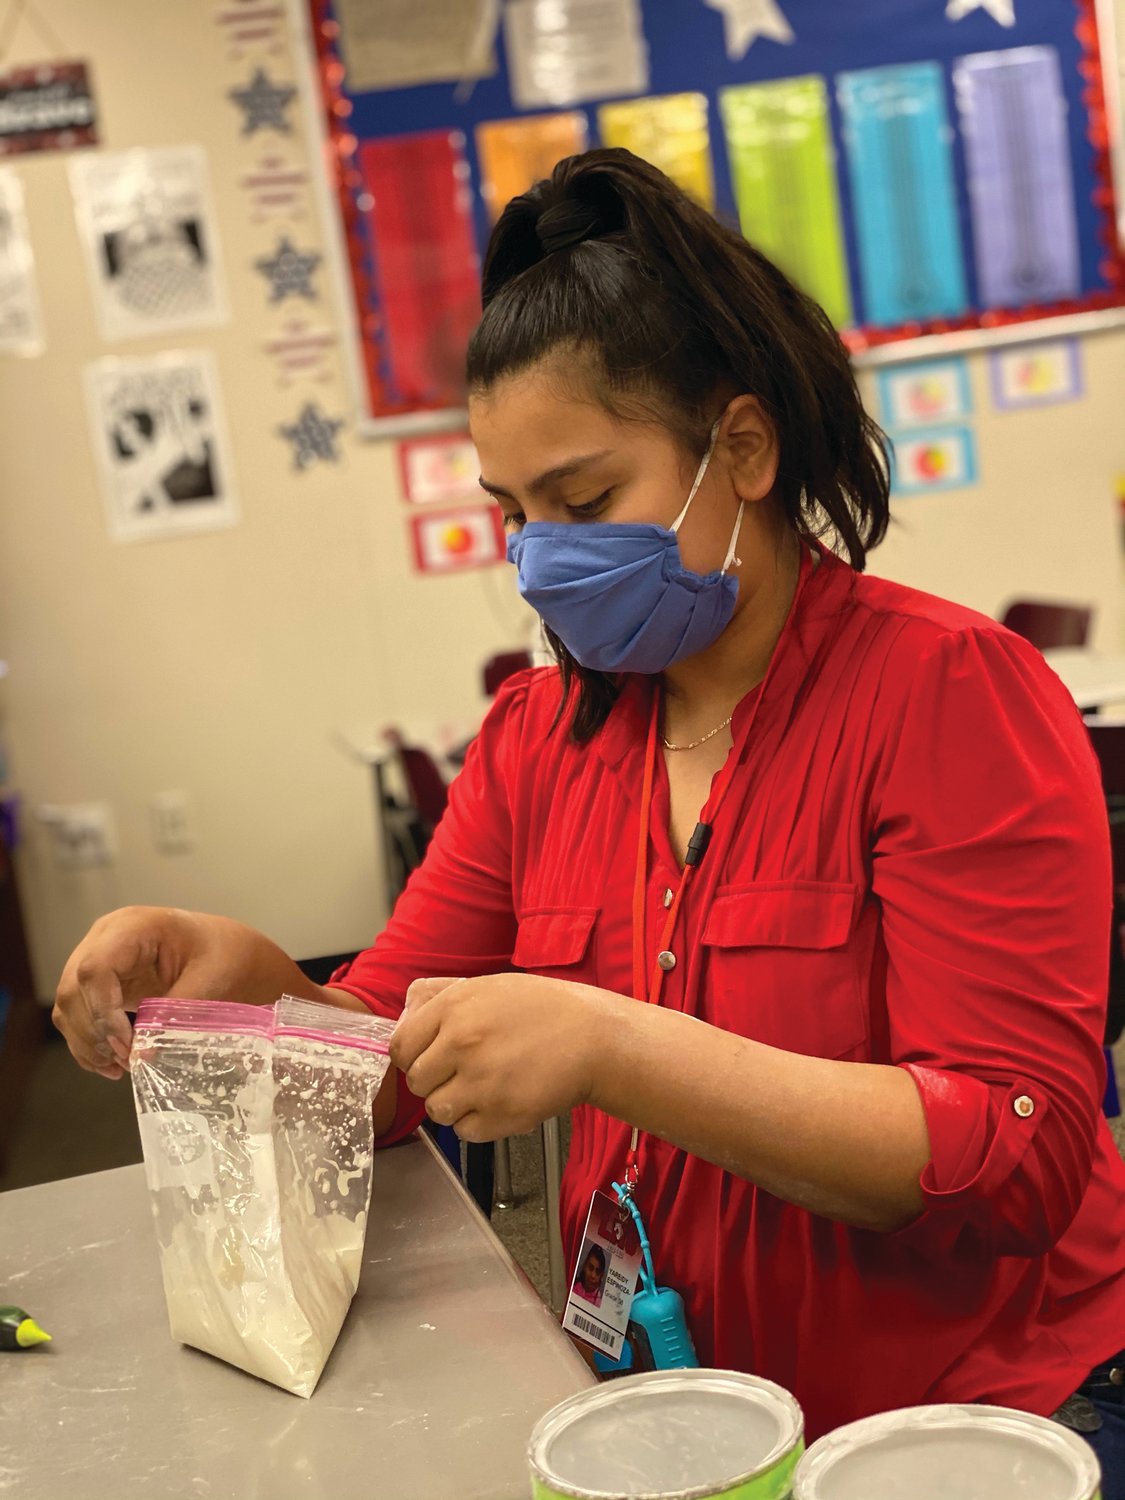 Yareidy Espinoza studies the non-Newtonian properties of the cornstarch and water solution known as Oobleck.